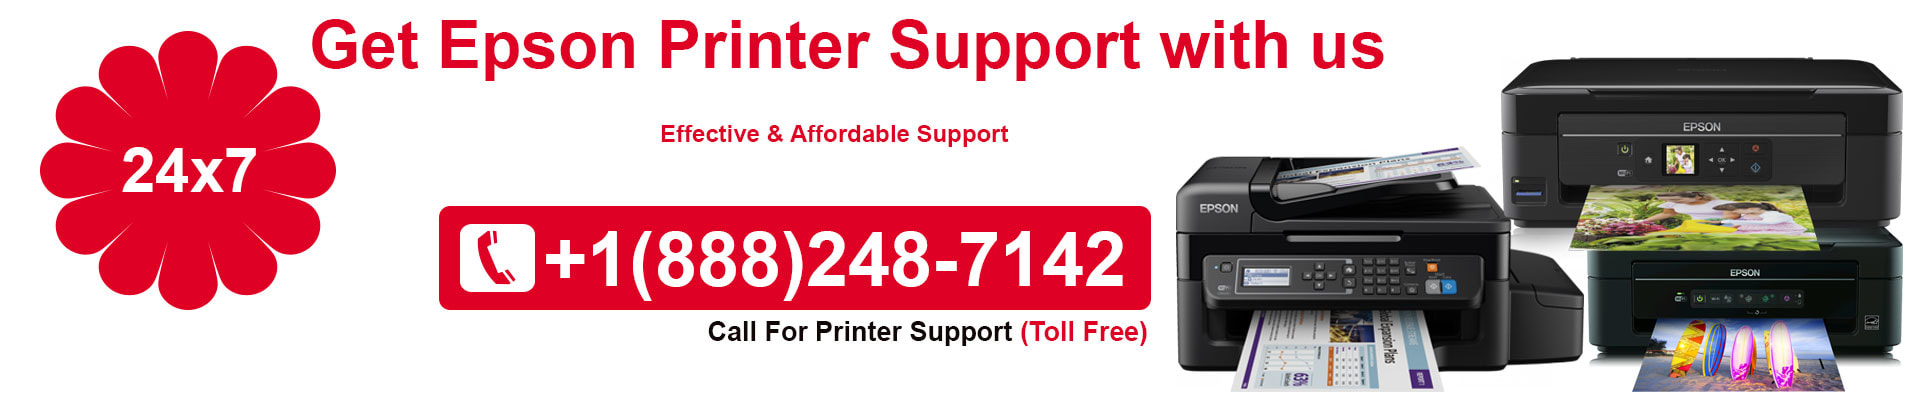 Epson Printer Support Phone Number 